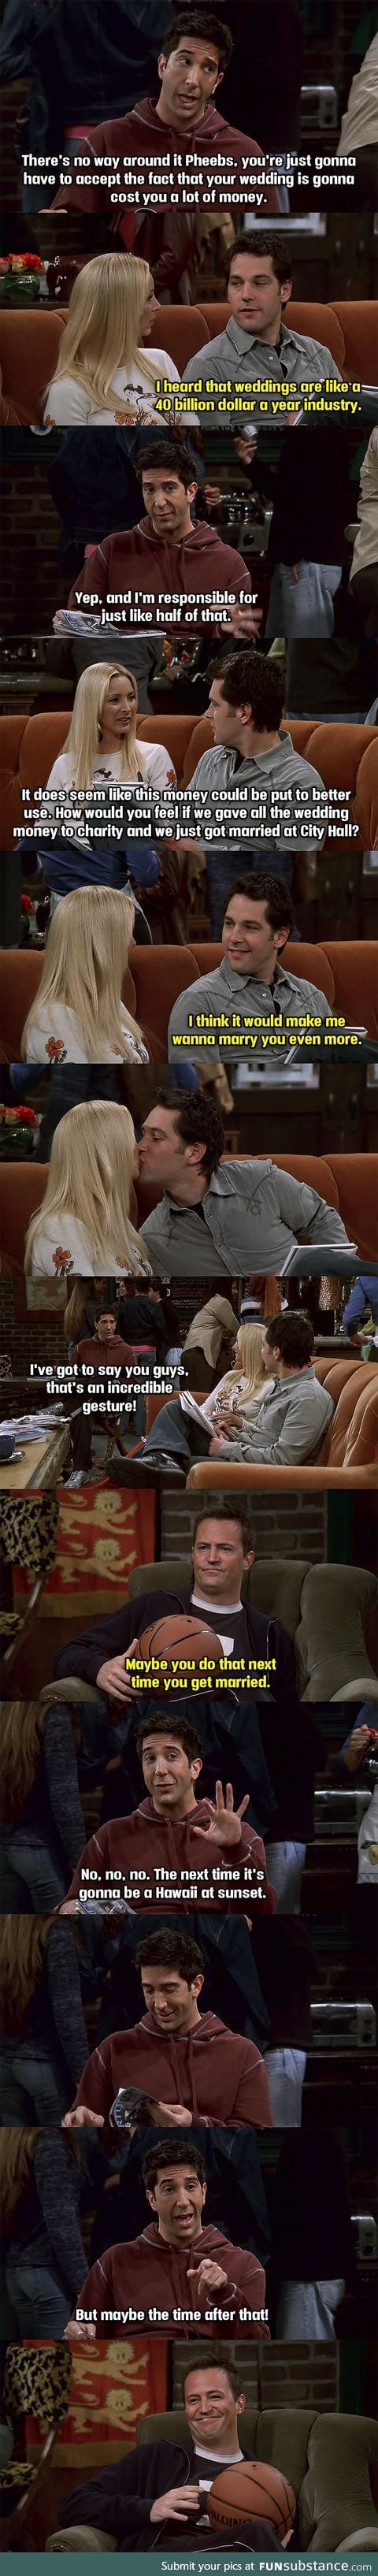 Ross: The divorce force